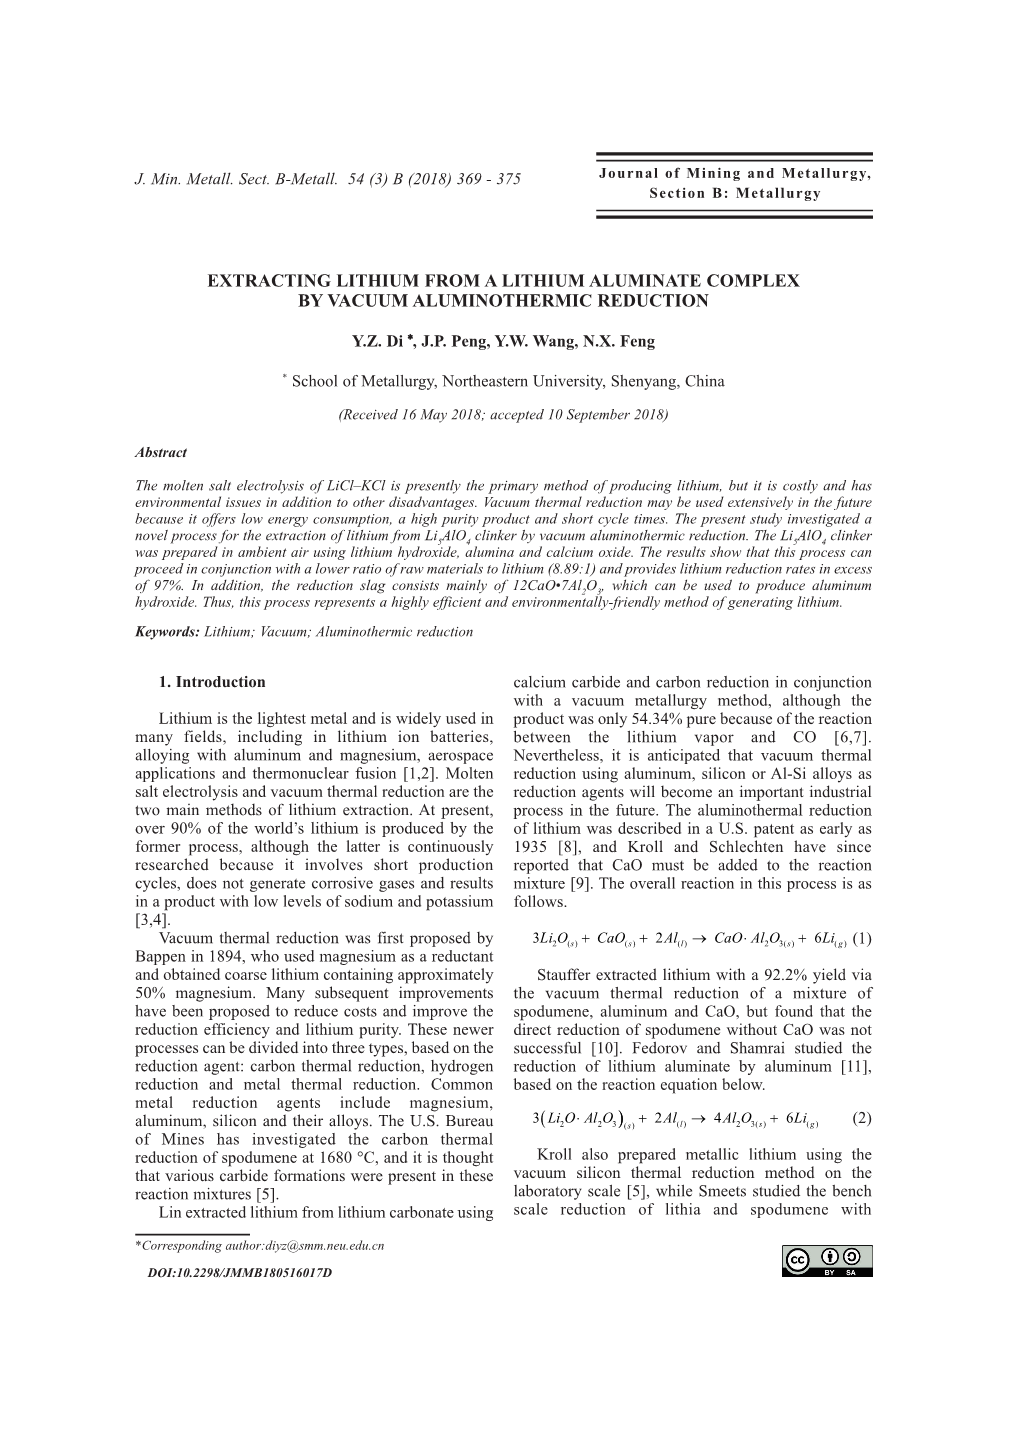 Extracting Lithium from a Lithium Aluminate Complex by Vacuum Aluminothermic Reduction